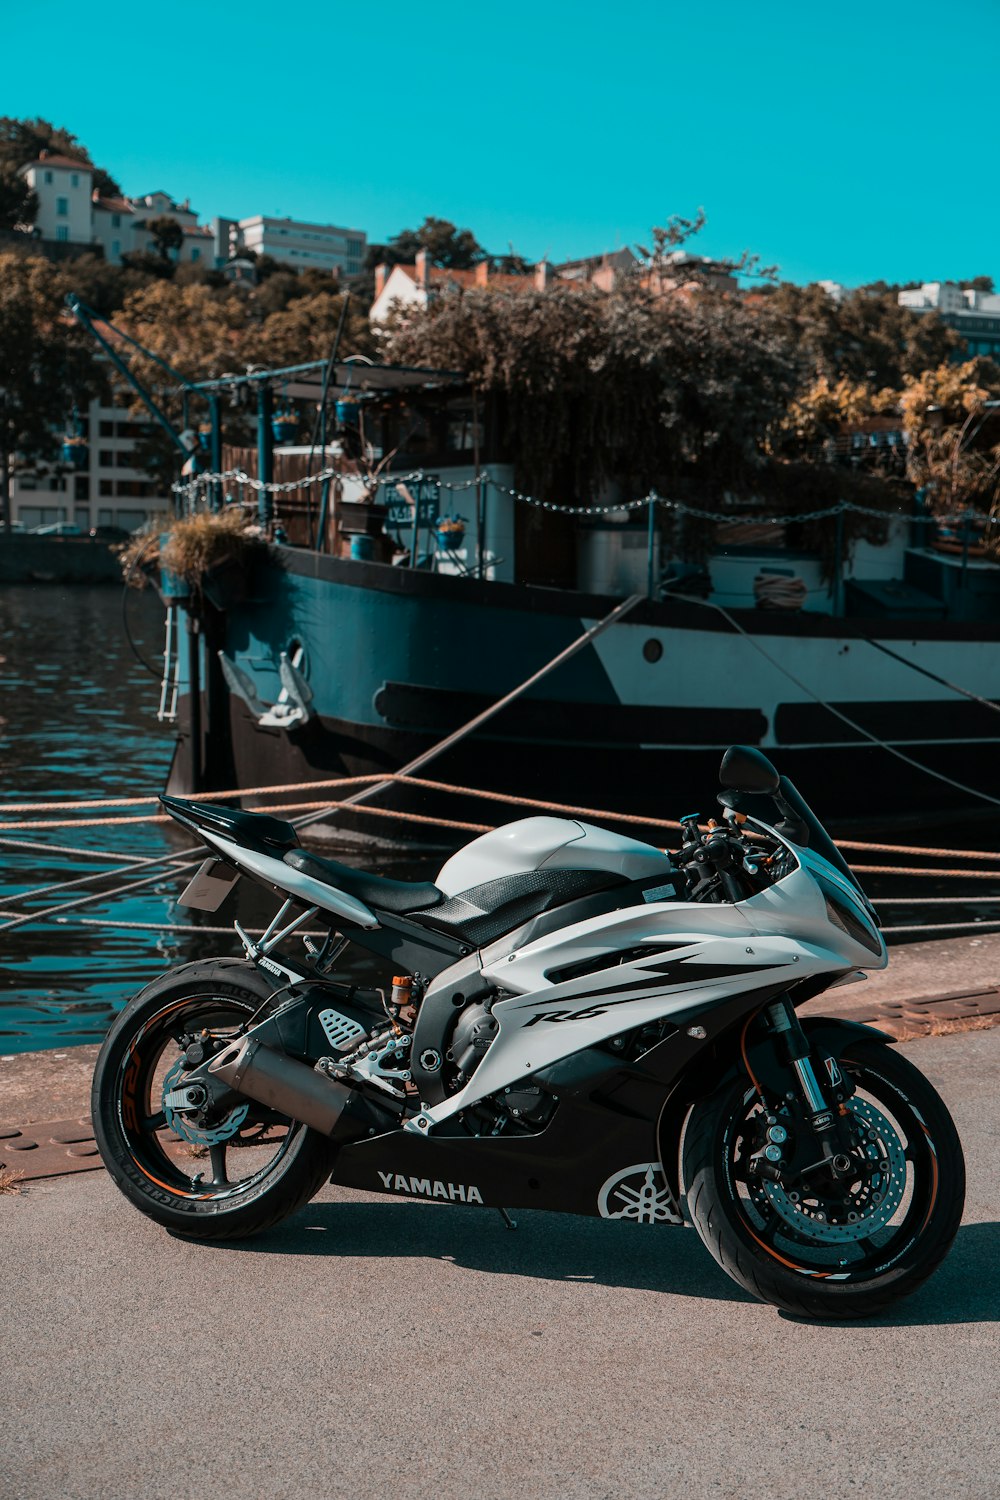 a motorcycle parked next to a boat in a harbor